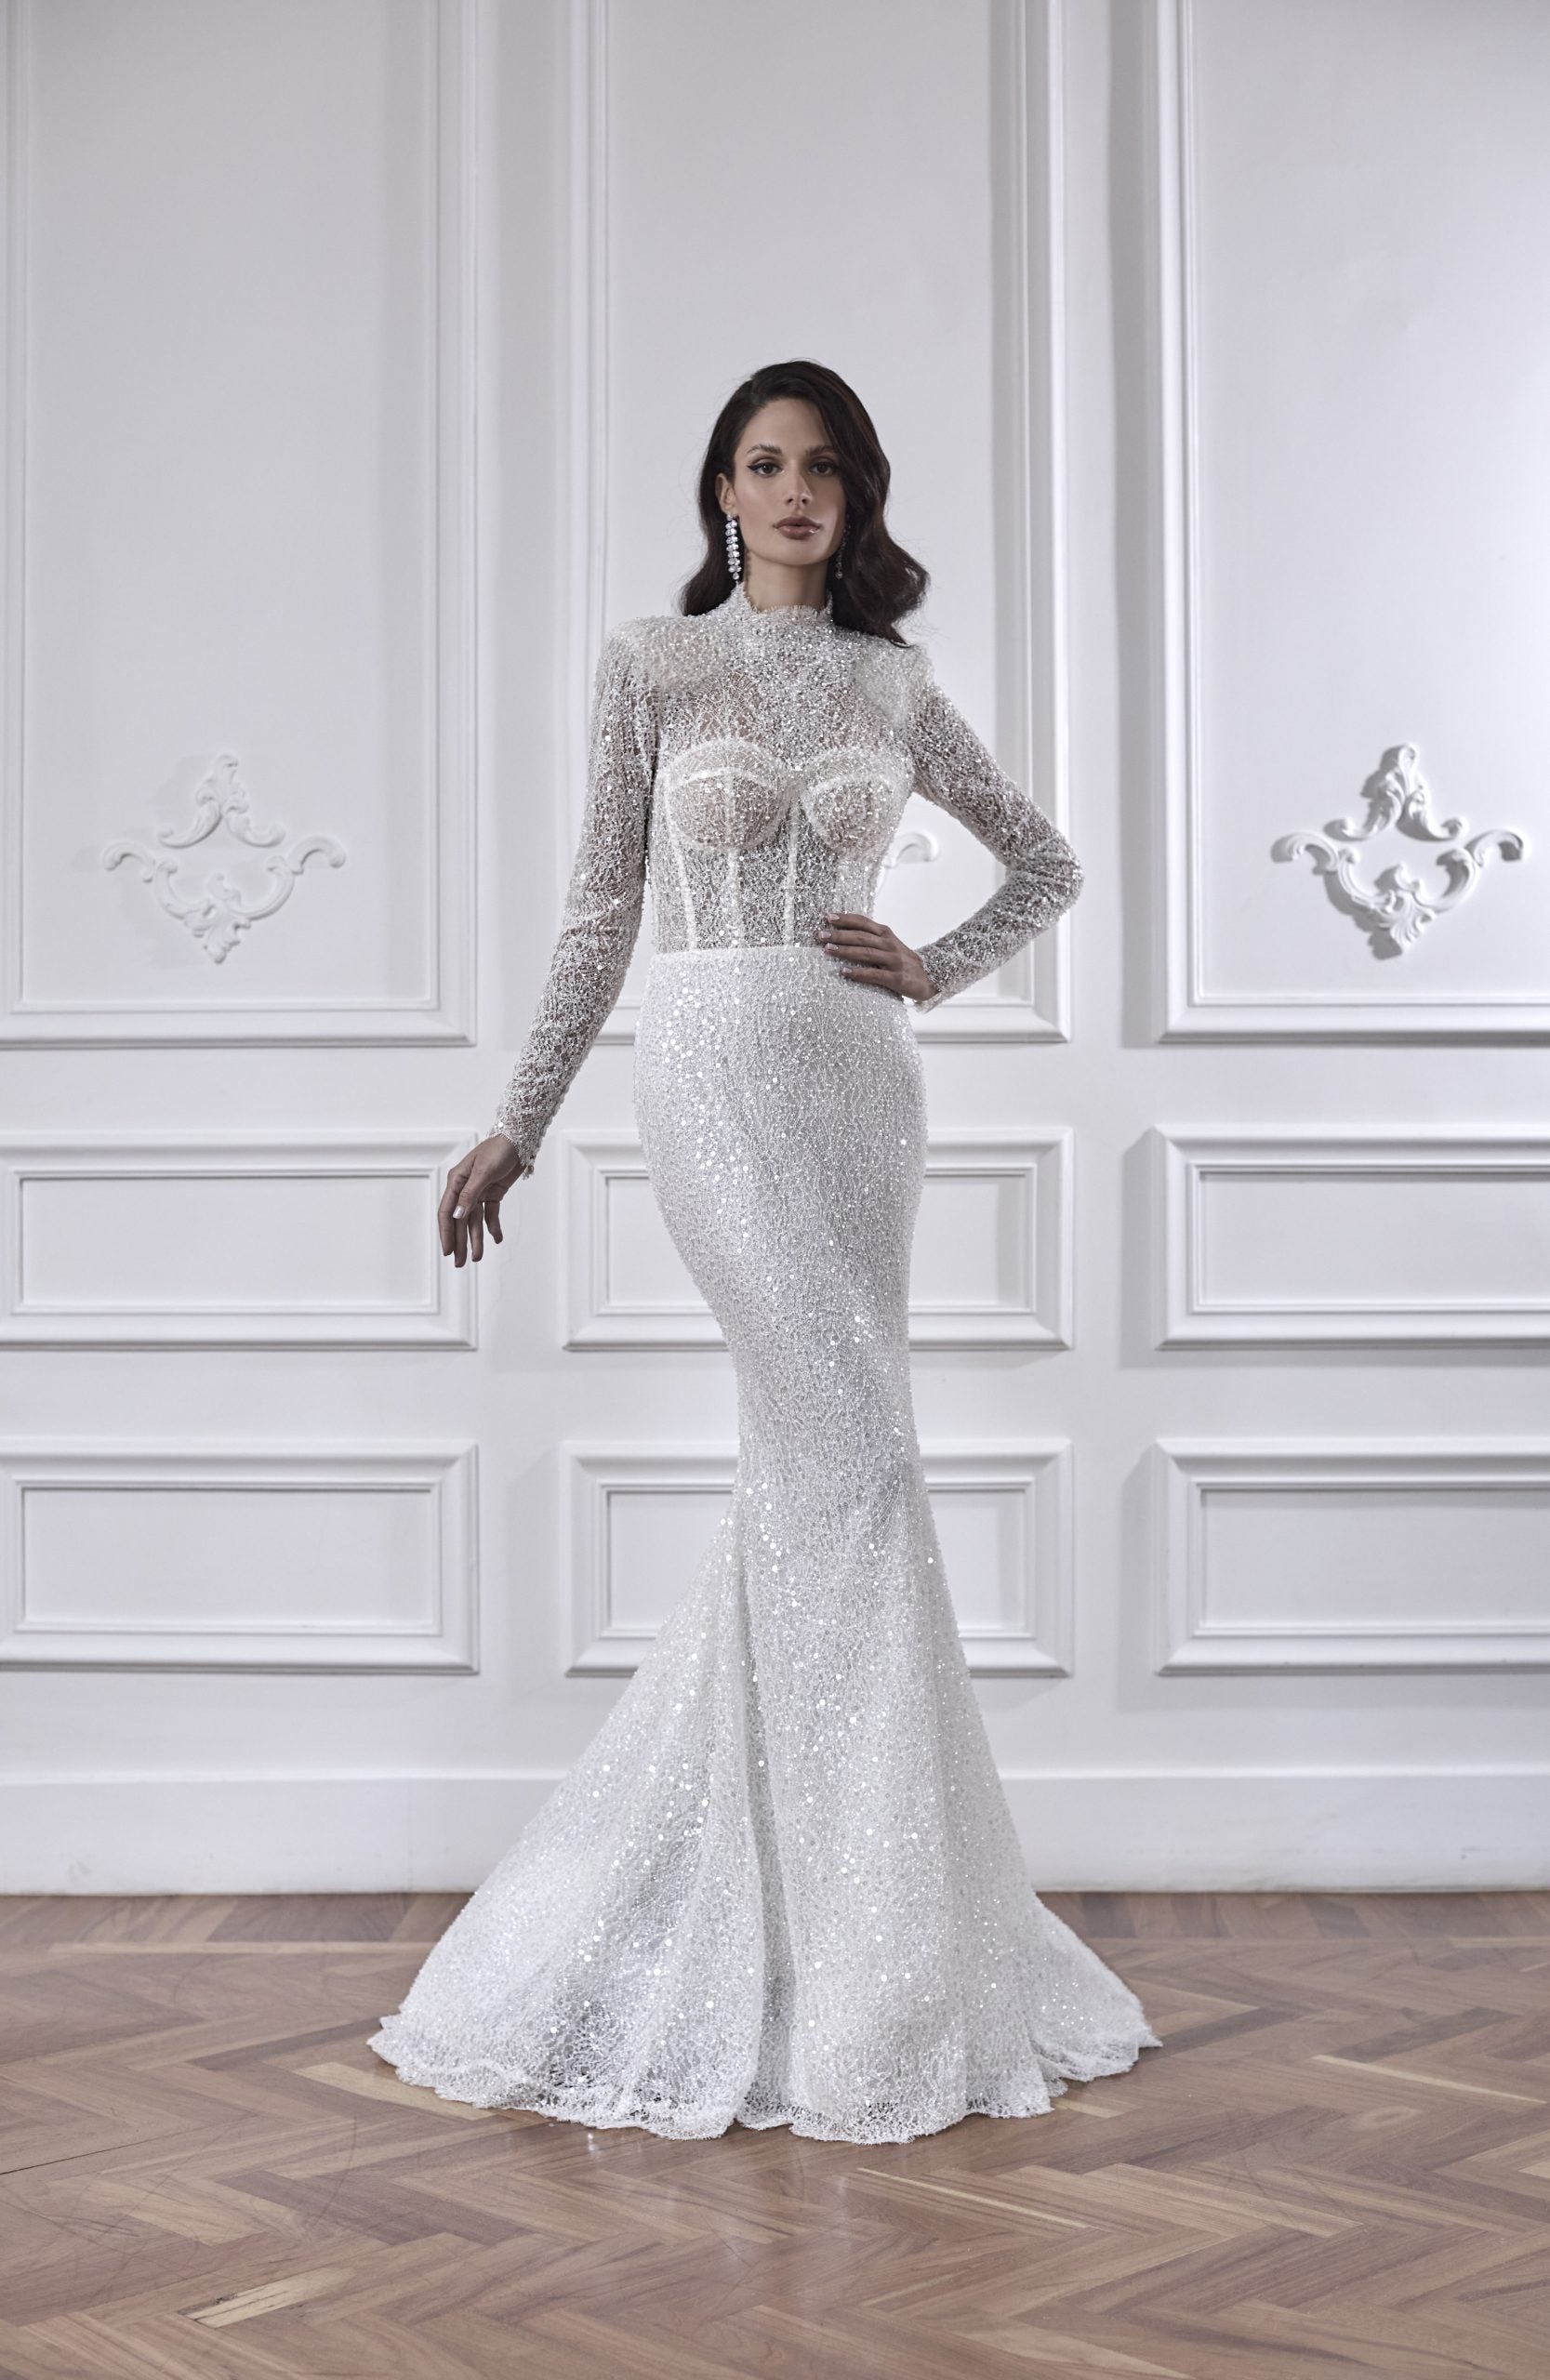 Long Sleeve Fit And Flare Wedding Dress With Detachable Overskirt by Maison Signore - Image 2